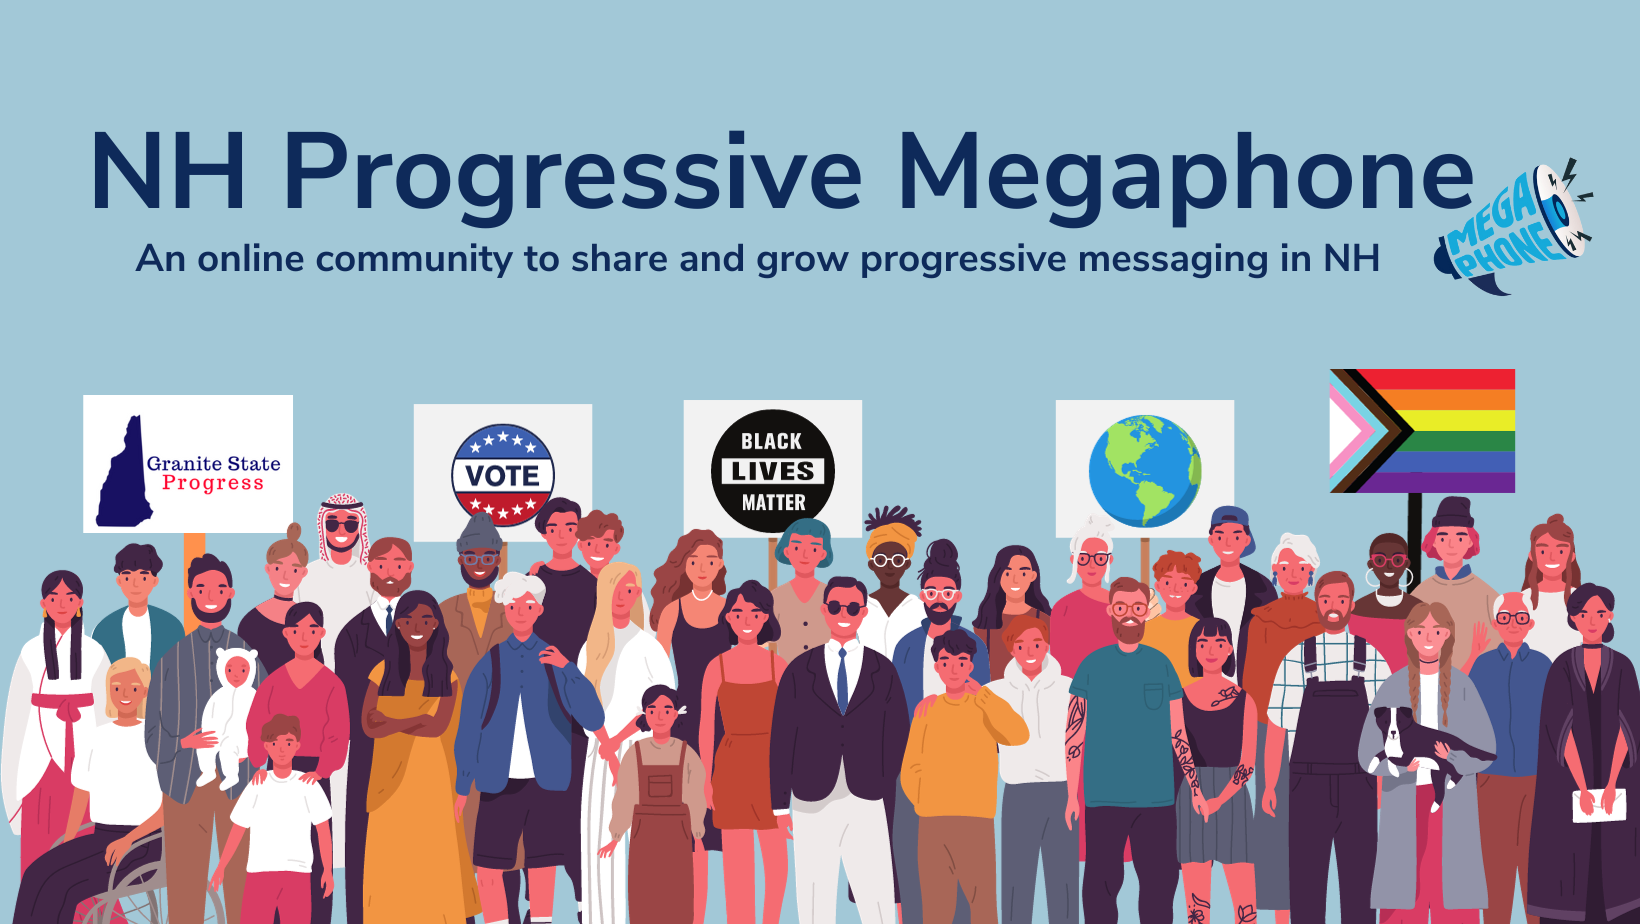 a banner that says "NH Progressive Megaphone - an online community to share and grow progressive messaging." Graphic images of people hold signs that say, "vote" "Black Lives Matter", and show the earth.